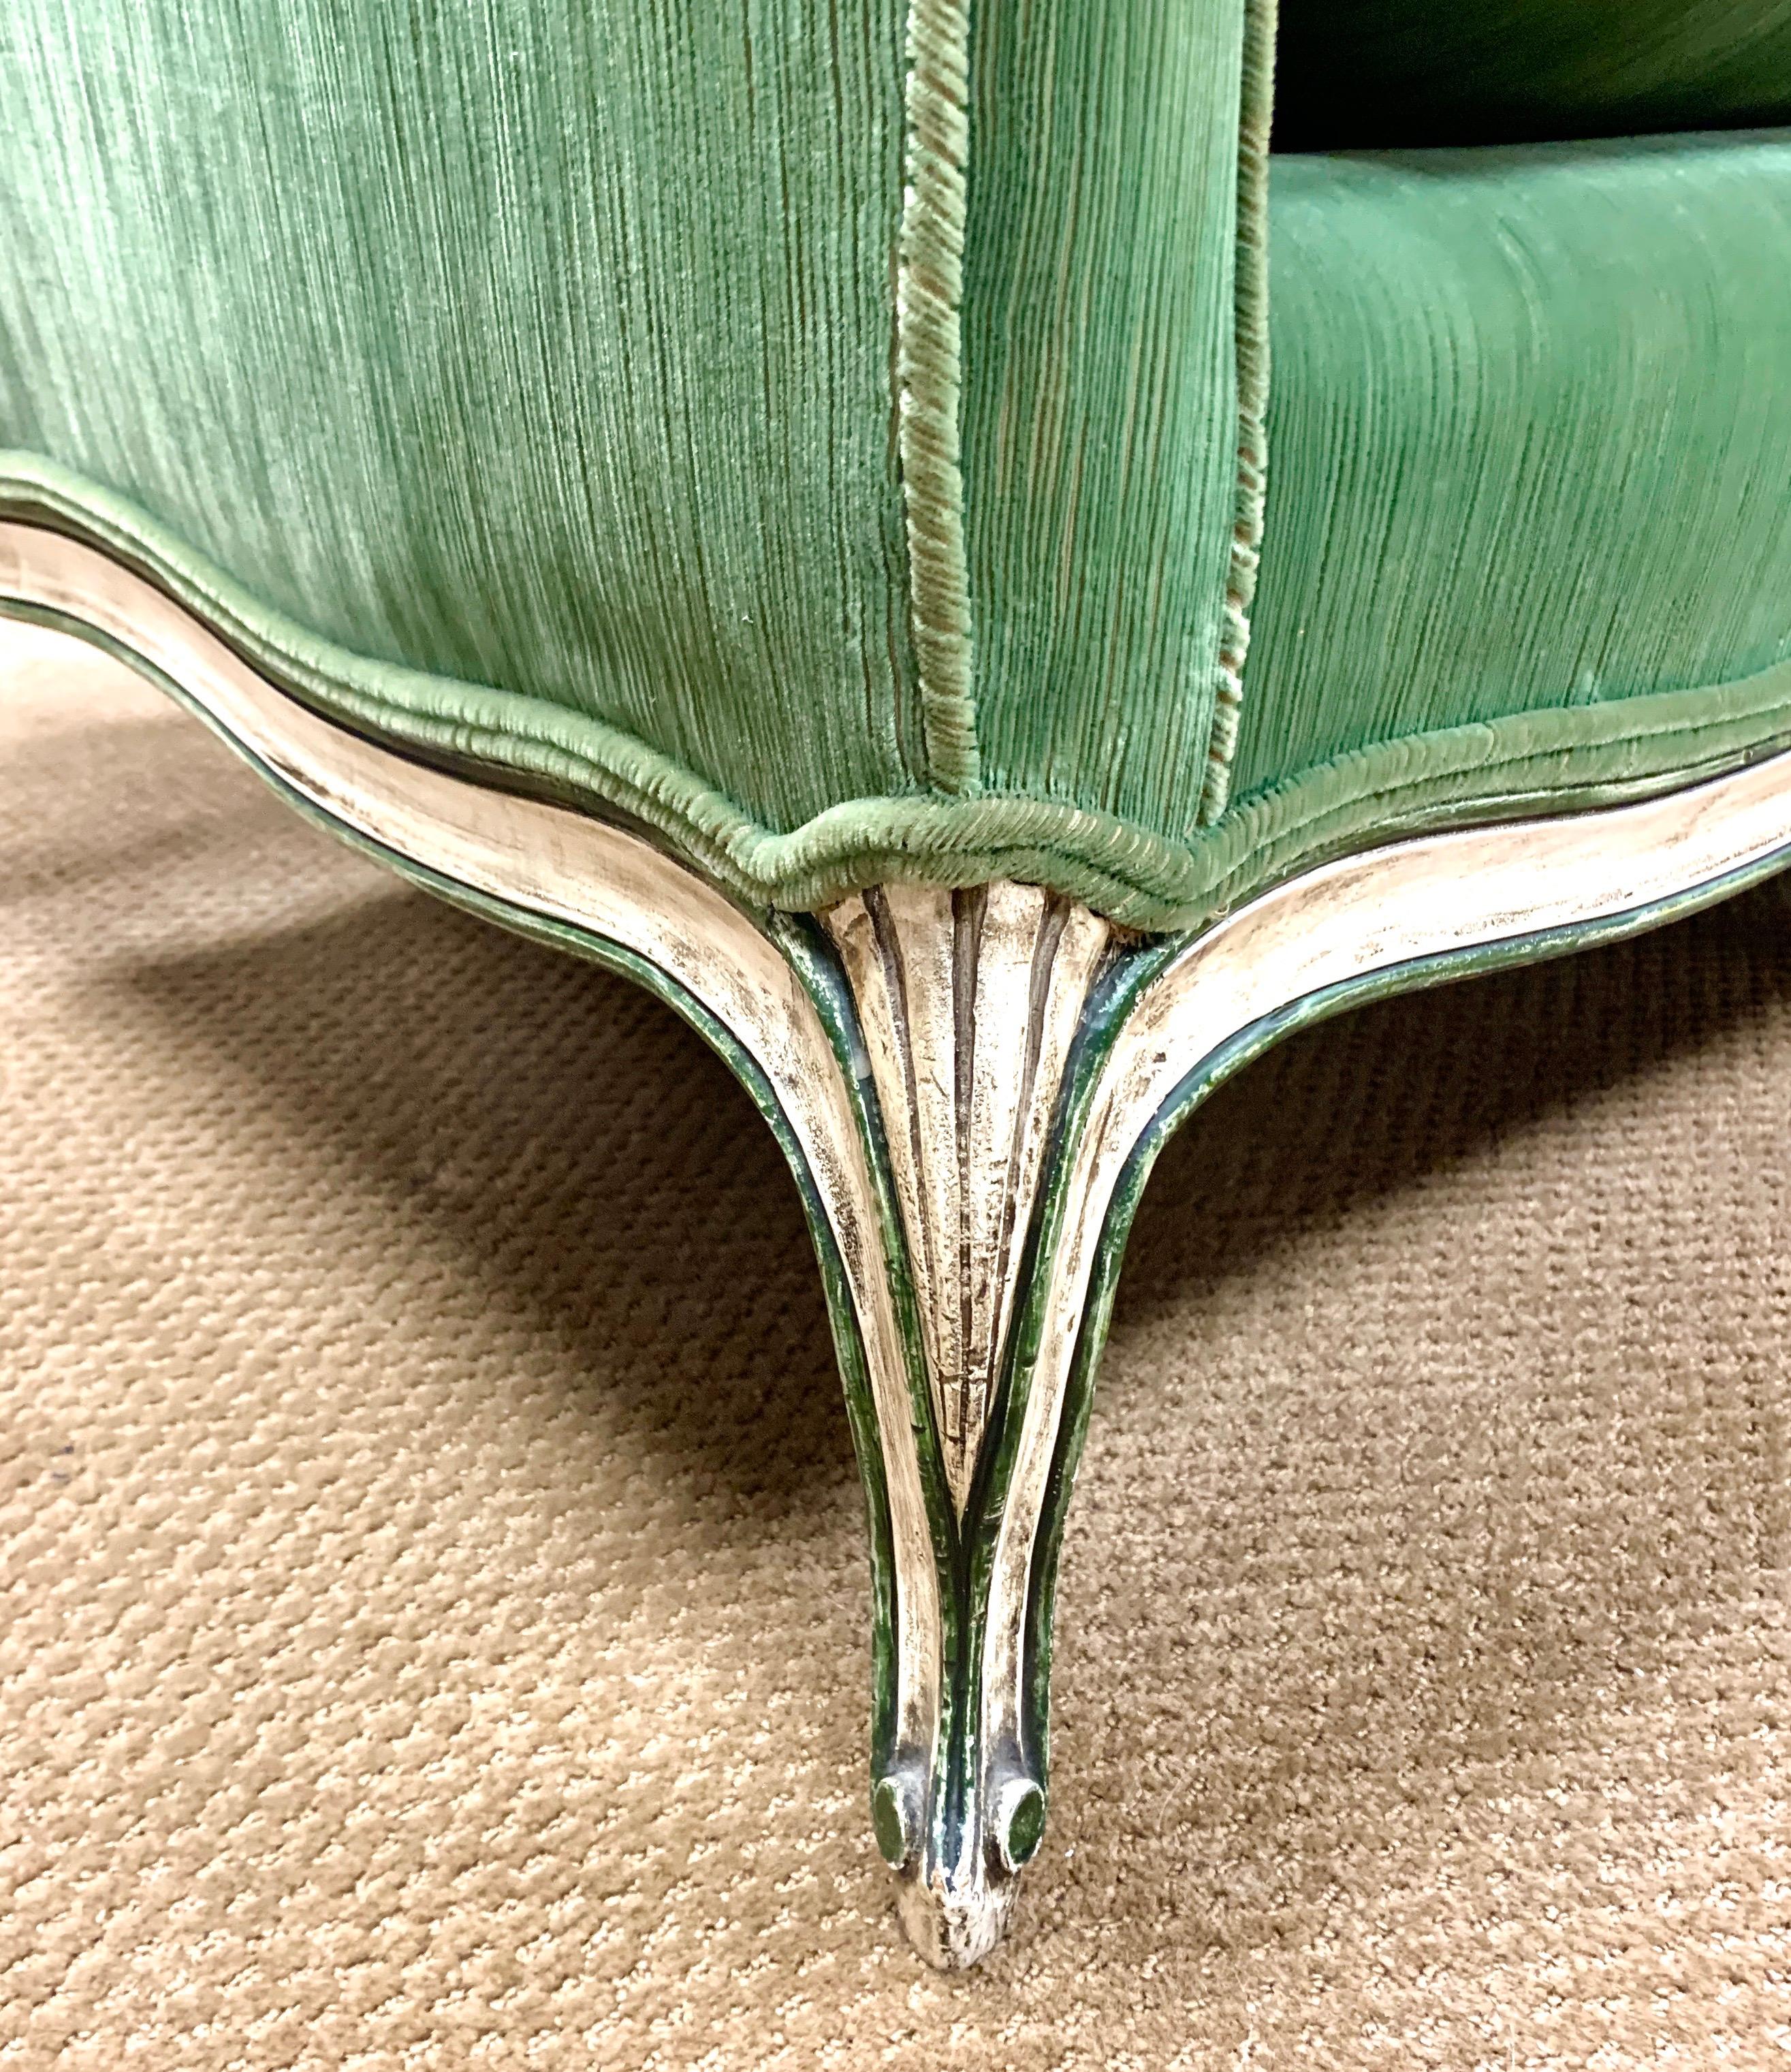 Stunning 19th Century French Louis XV style wooden three-seat sofa with cabriole legs and luxurious green velvet upholstery. The sofa has a distressed cream painted frame and down filled seat cushion.